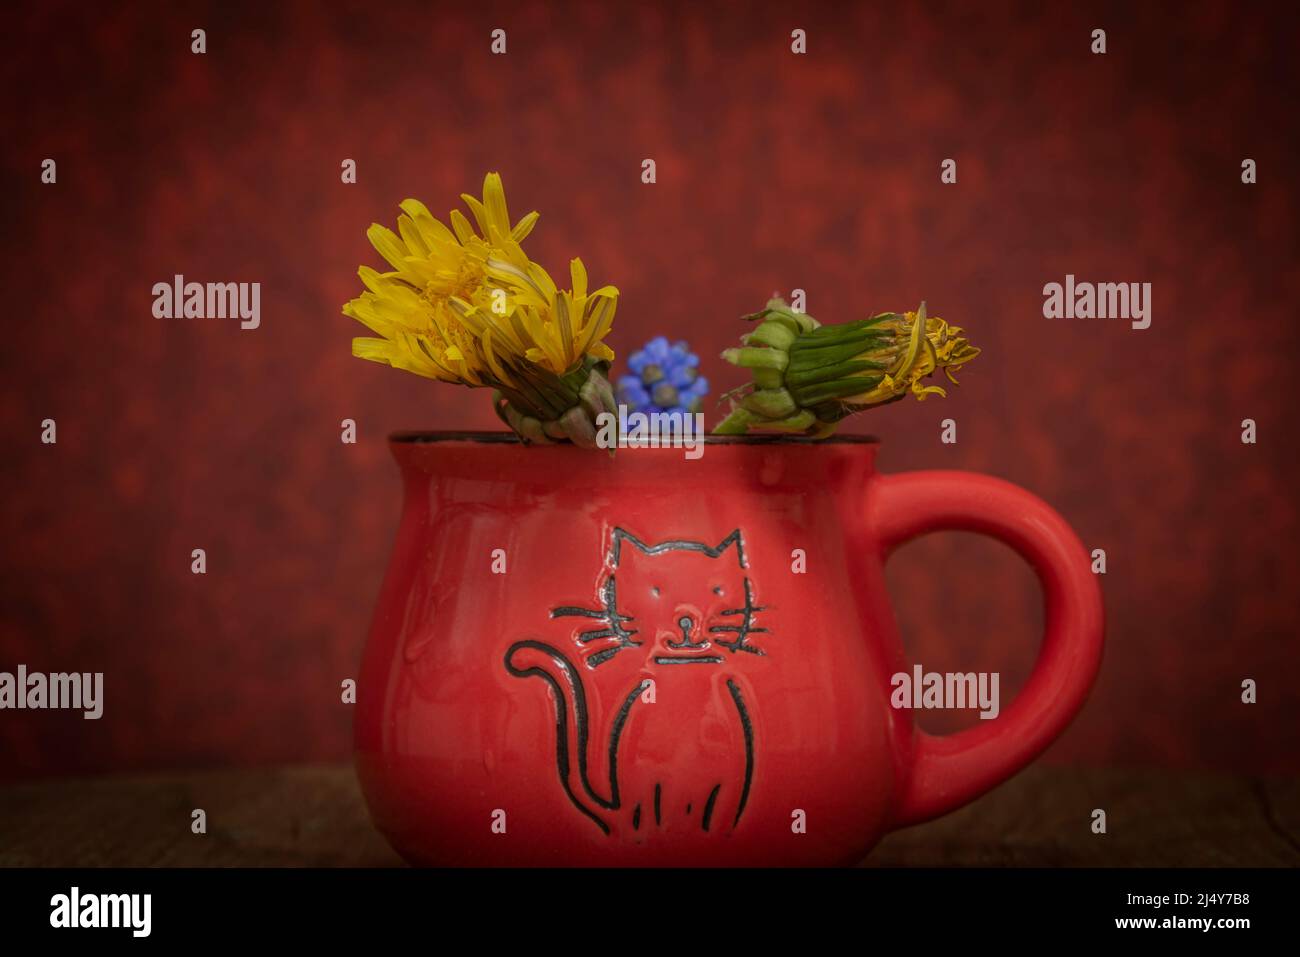 Blue Spike and Dandelion flowers blooms with red vintage color background in cat cup Stock Photo